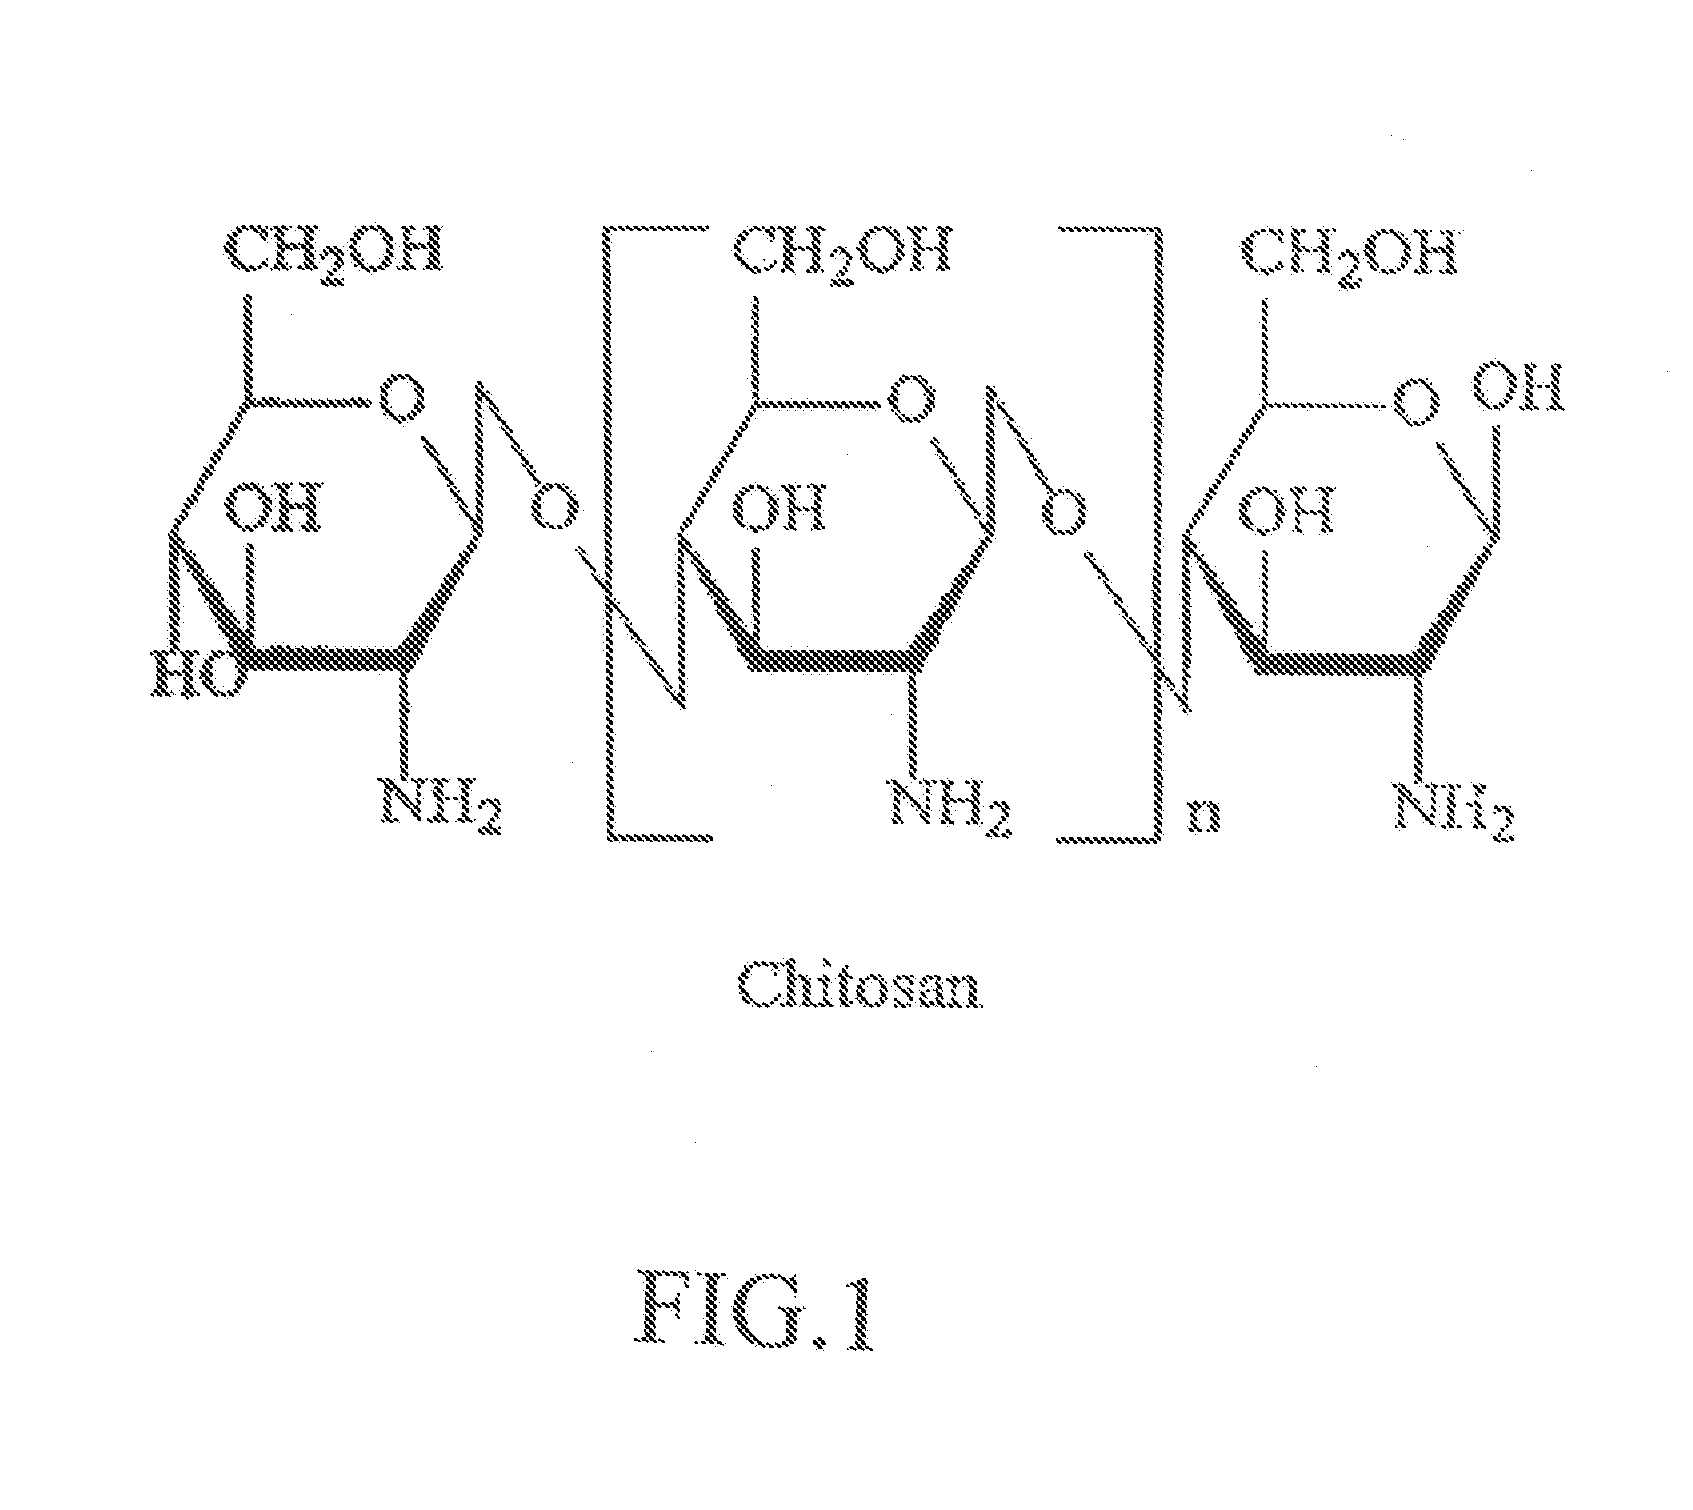 Process for Anti-microbial textiles treatment